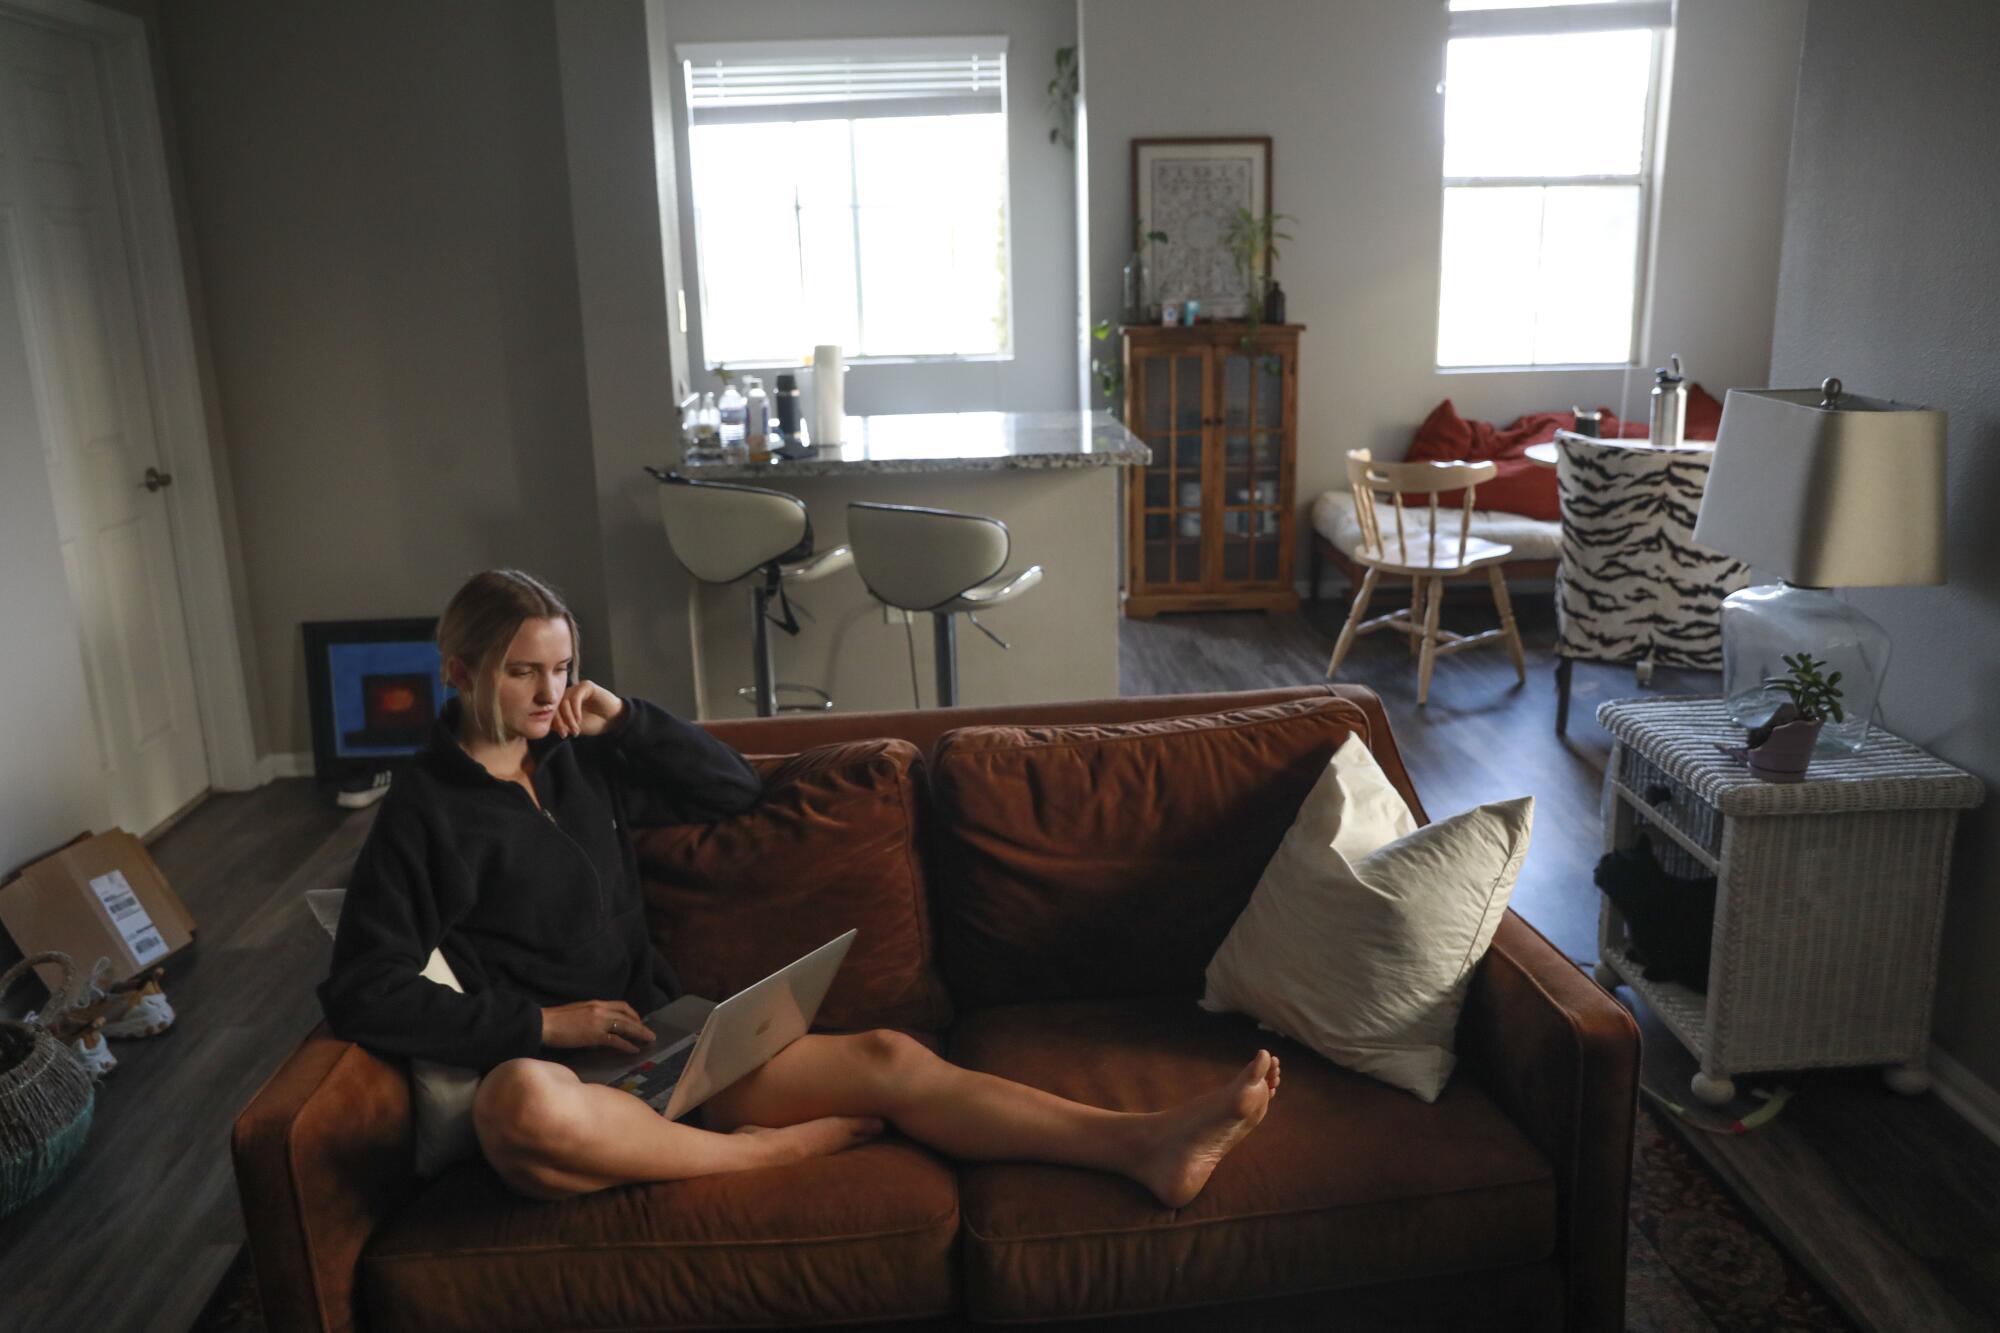 Athena Leisching, a junior at UCSD, is struggling to find affordable off-campus housing.